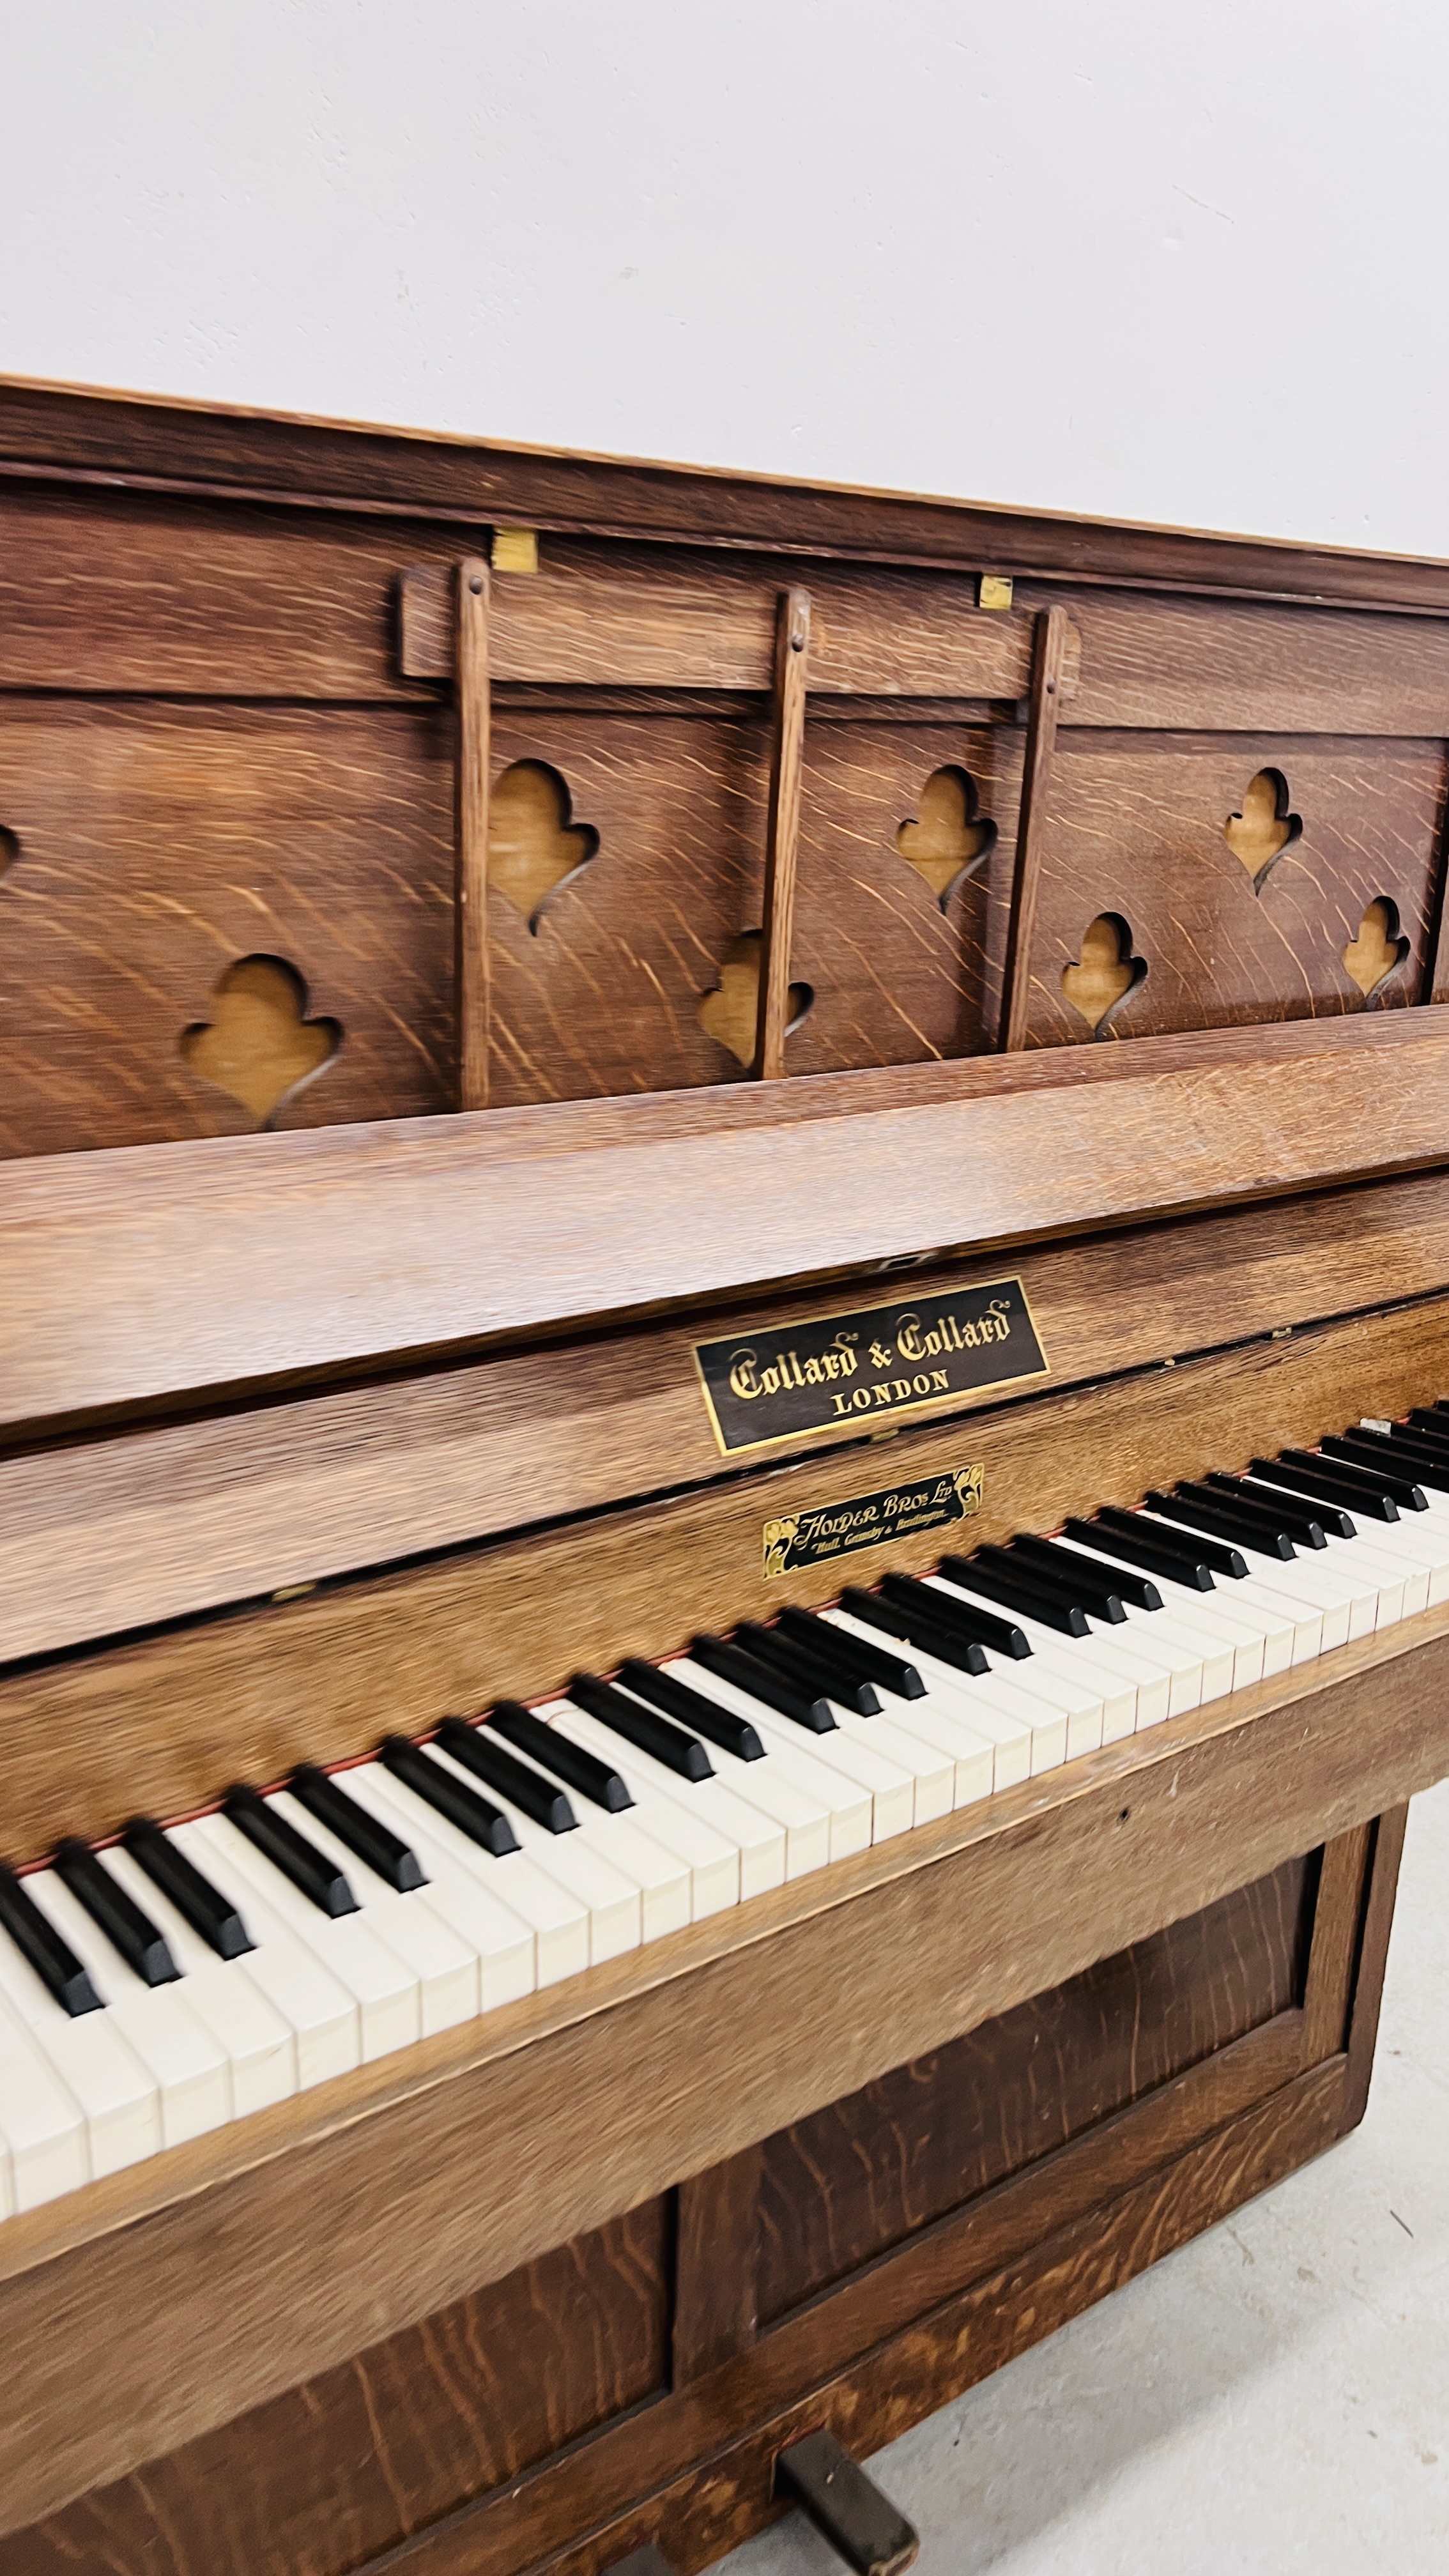 A VINTAGE OAK ARTS AND CRAFTS PIANO WITH ORIGINAL MAKERS LABEL COLLARD & COLLARD HOLDER BROS. - Image 5 of 12